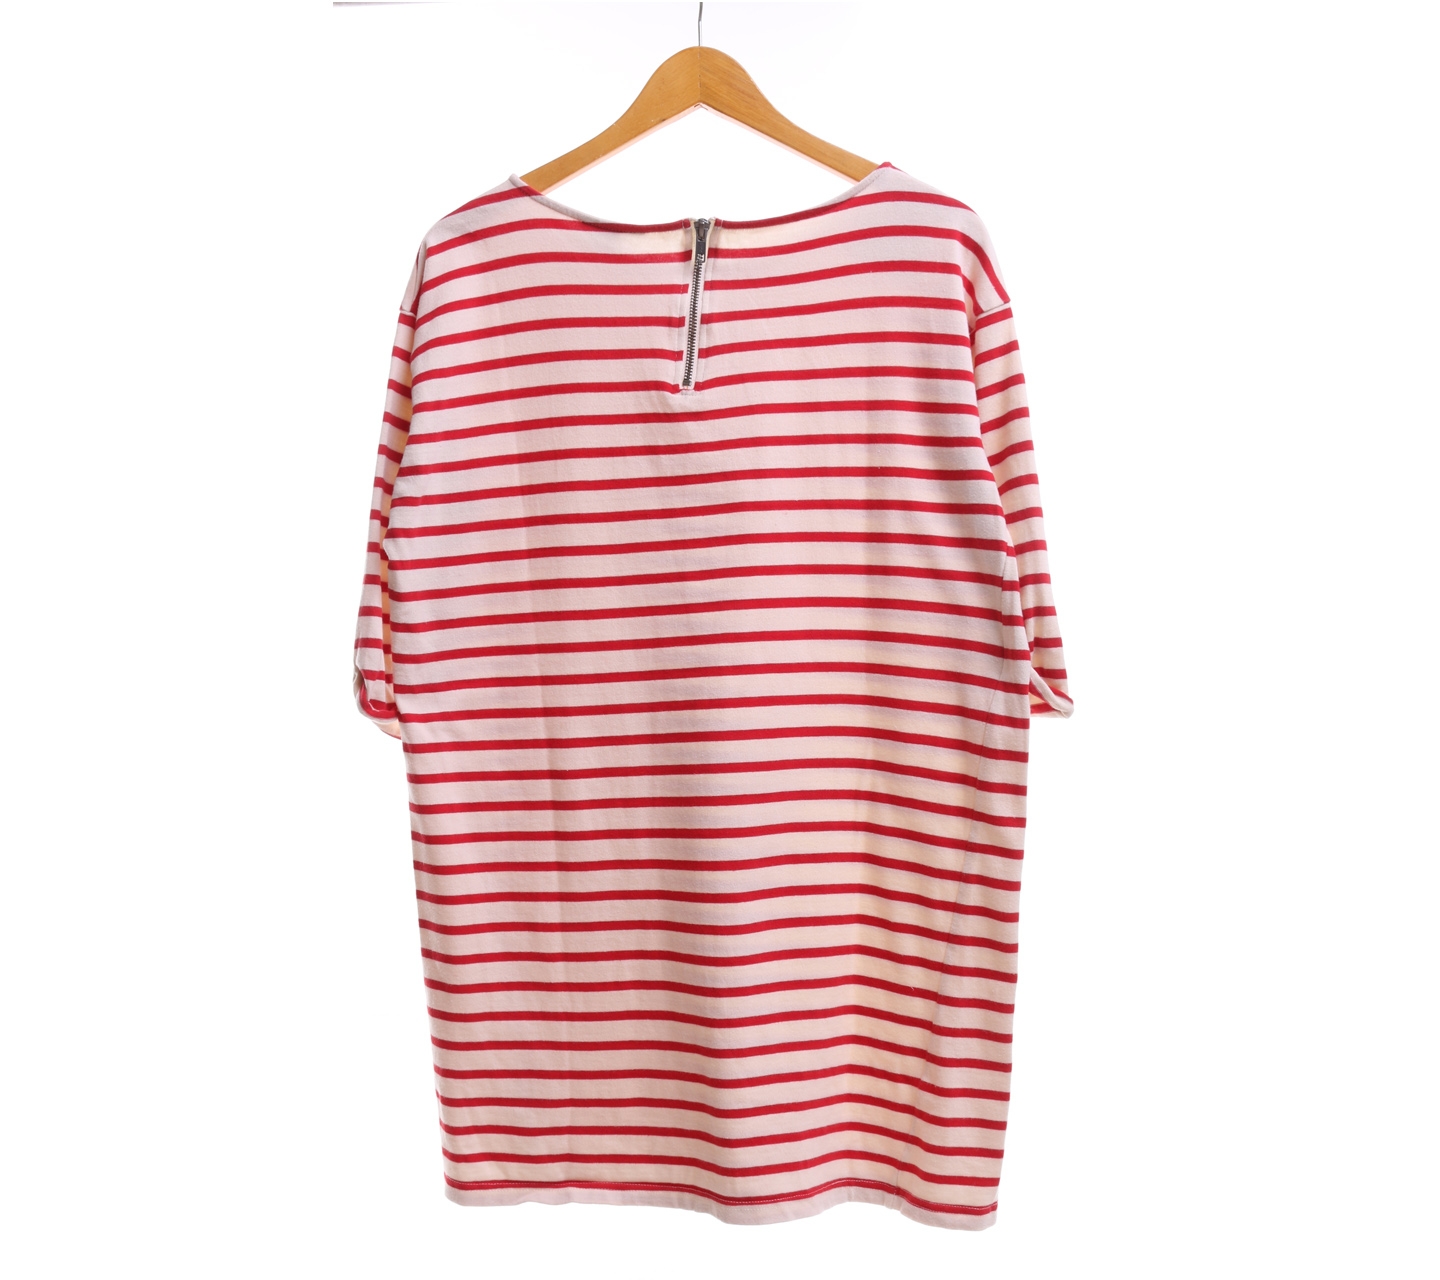 Topshop Red And Cream Striped Blouse